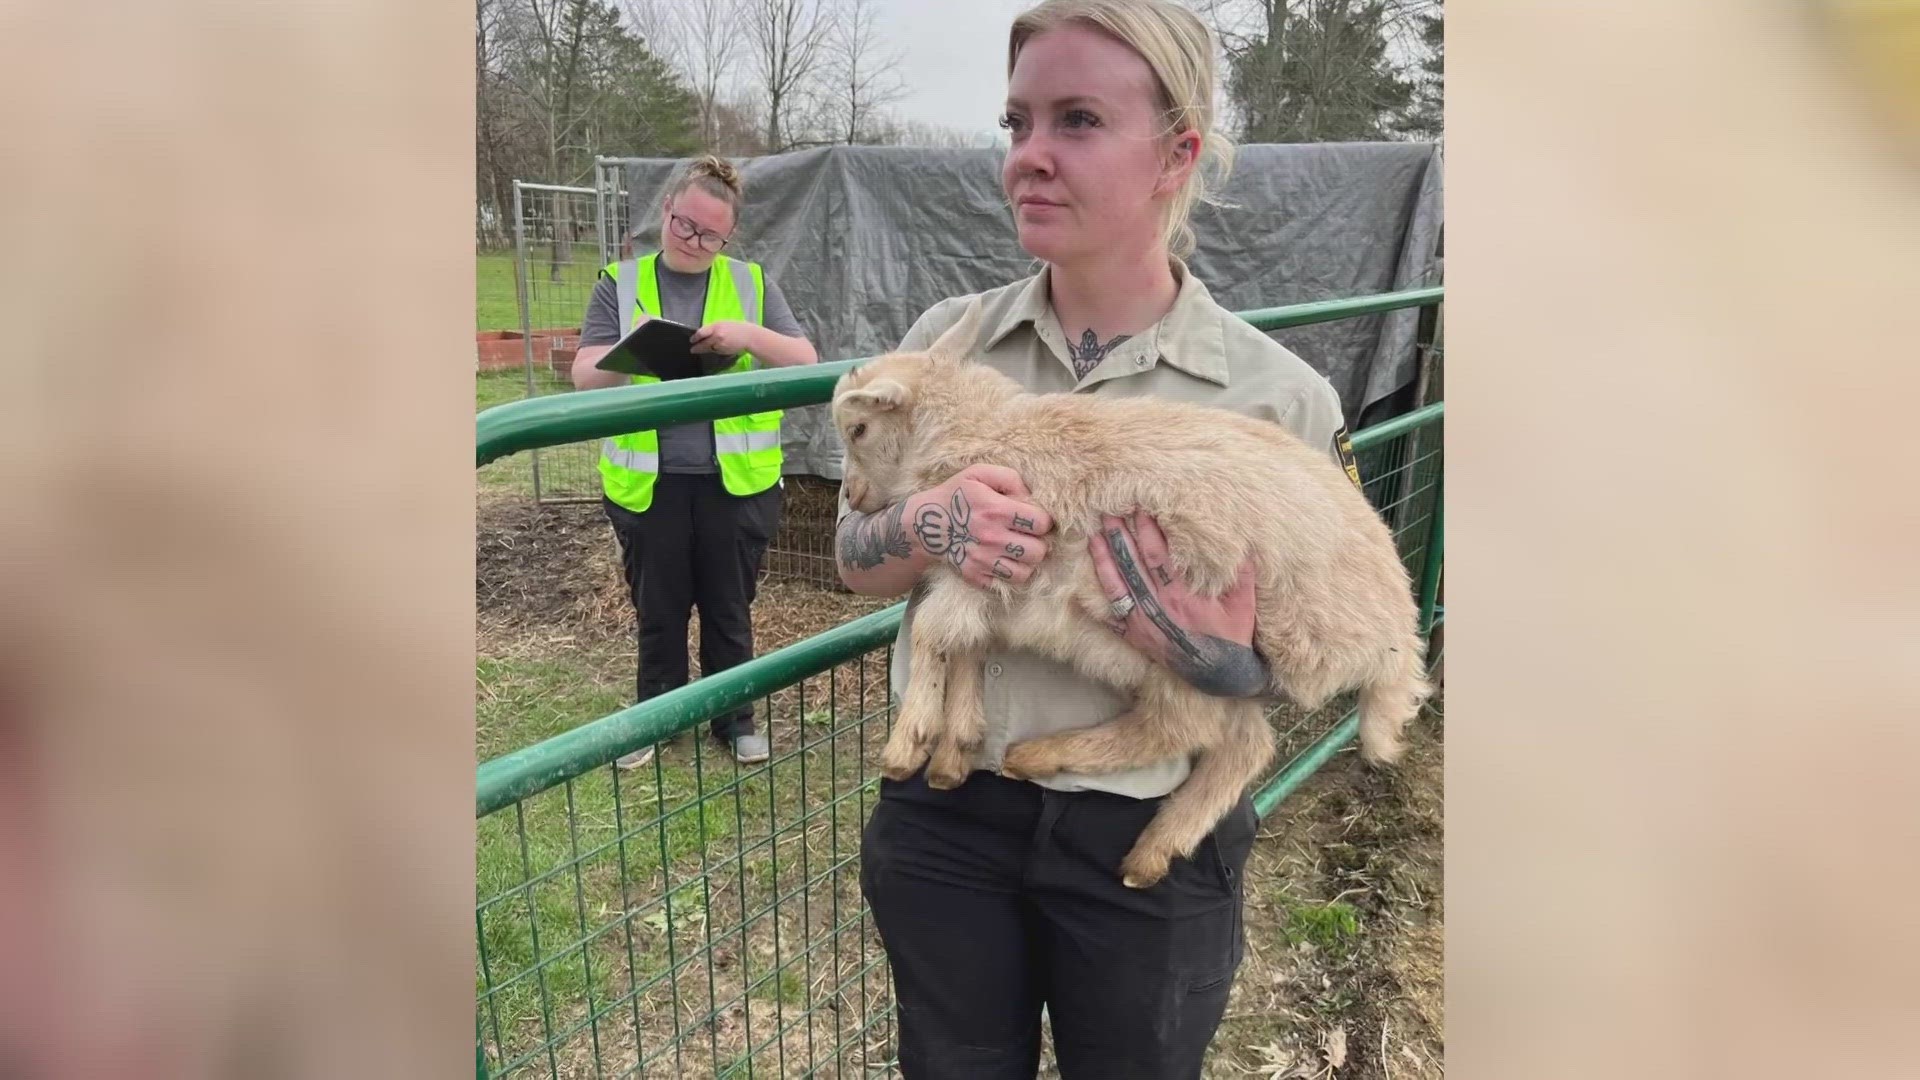 A total of 88 pigs, goats, dogs, chickens, ducks and rabbits were impounded from the Lorain County farm. Dead animals were also removed from the property.